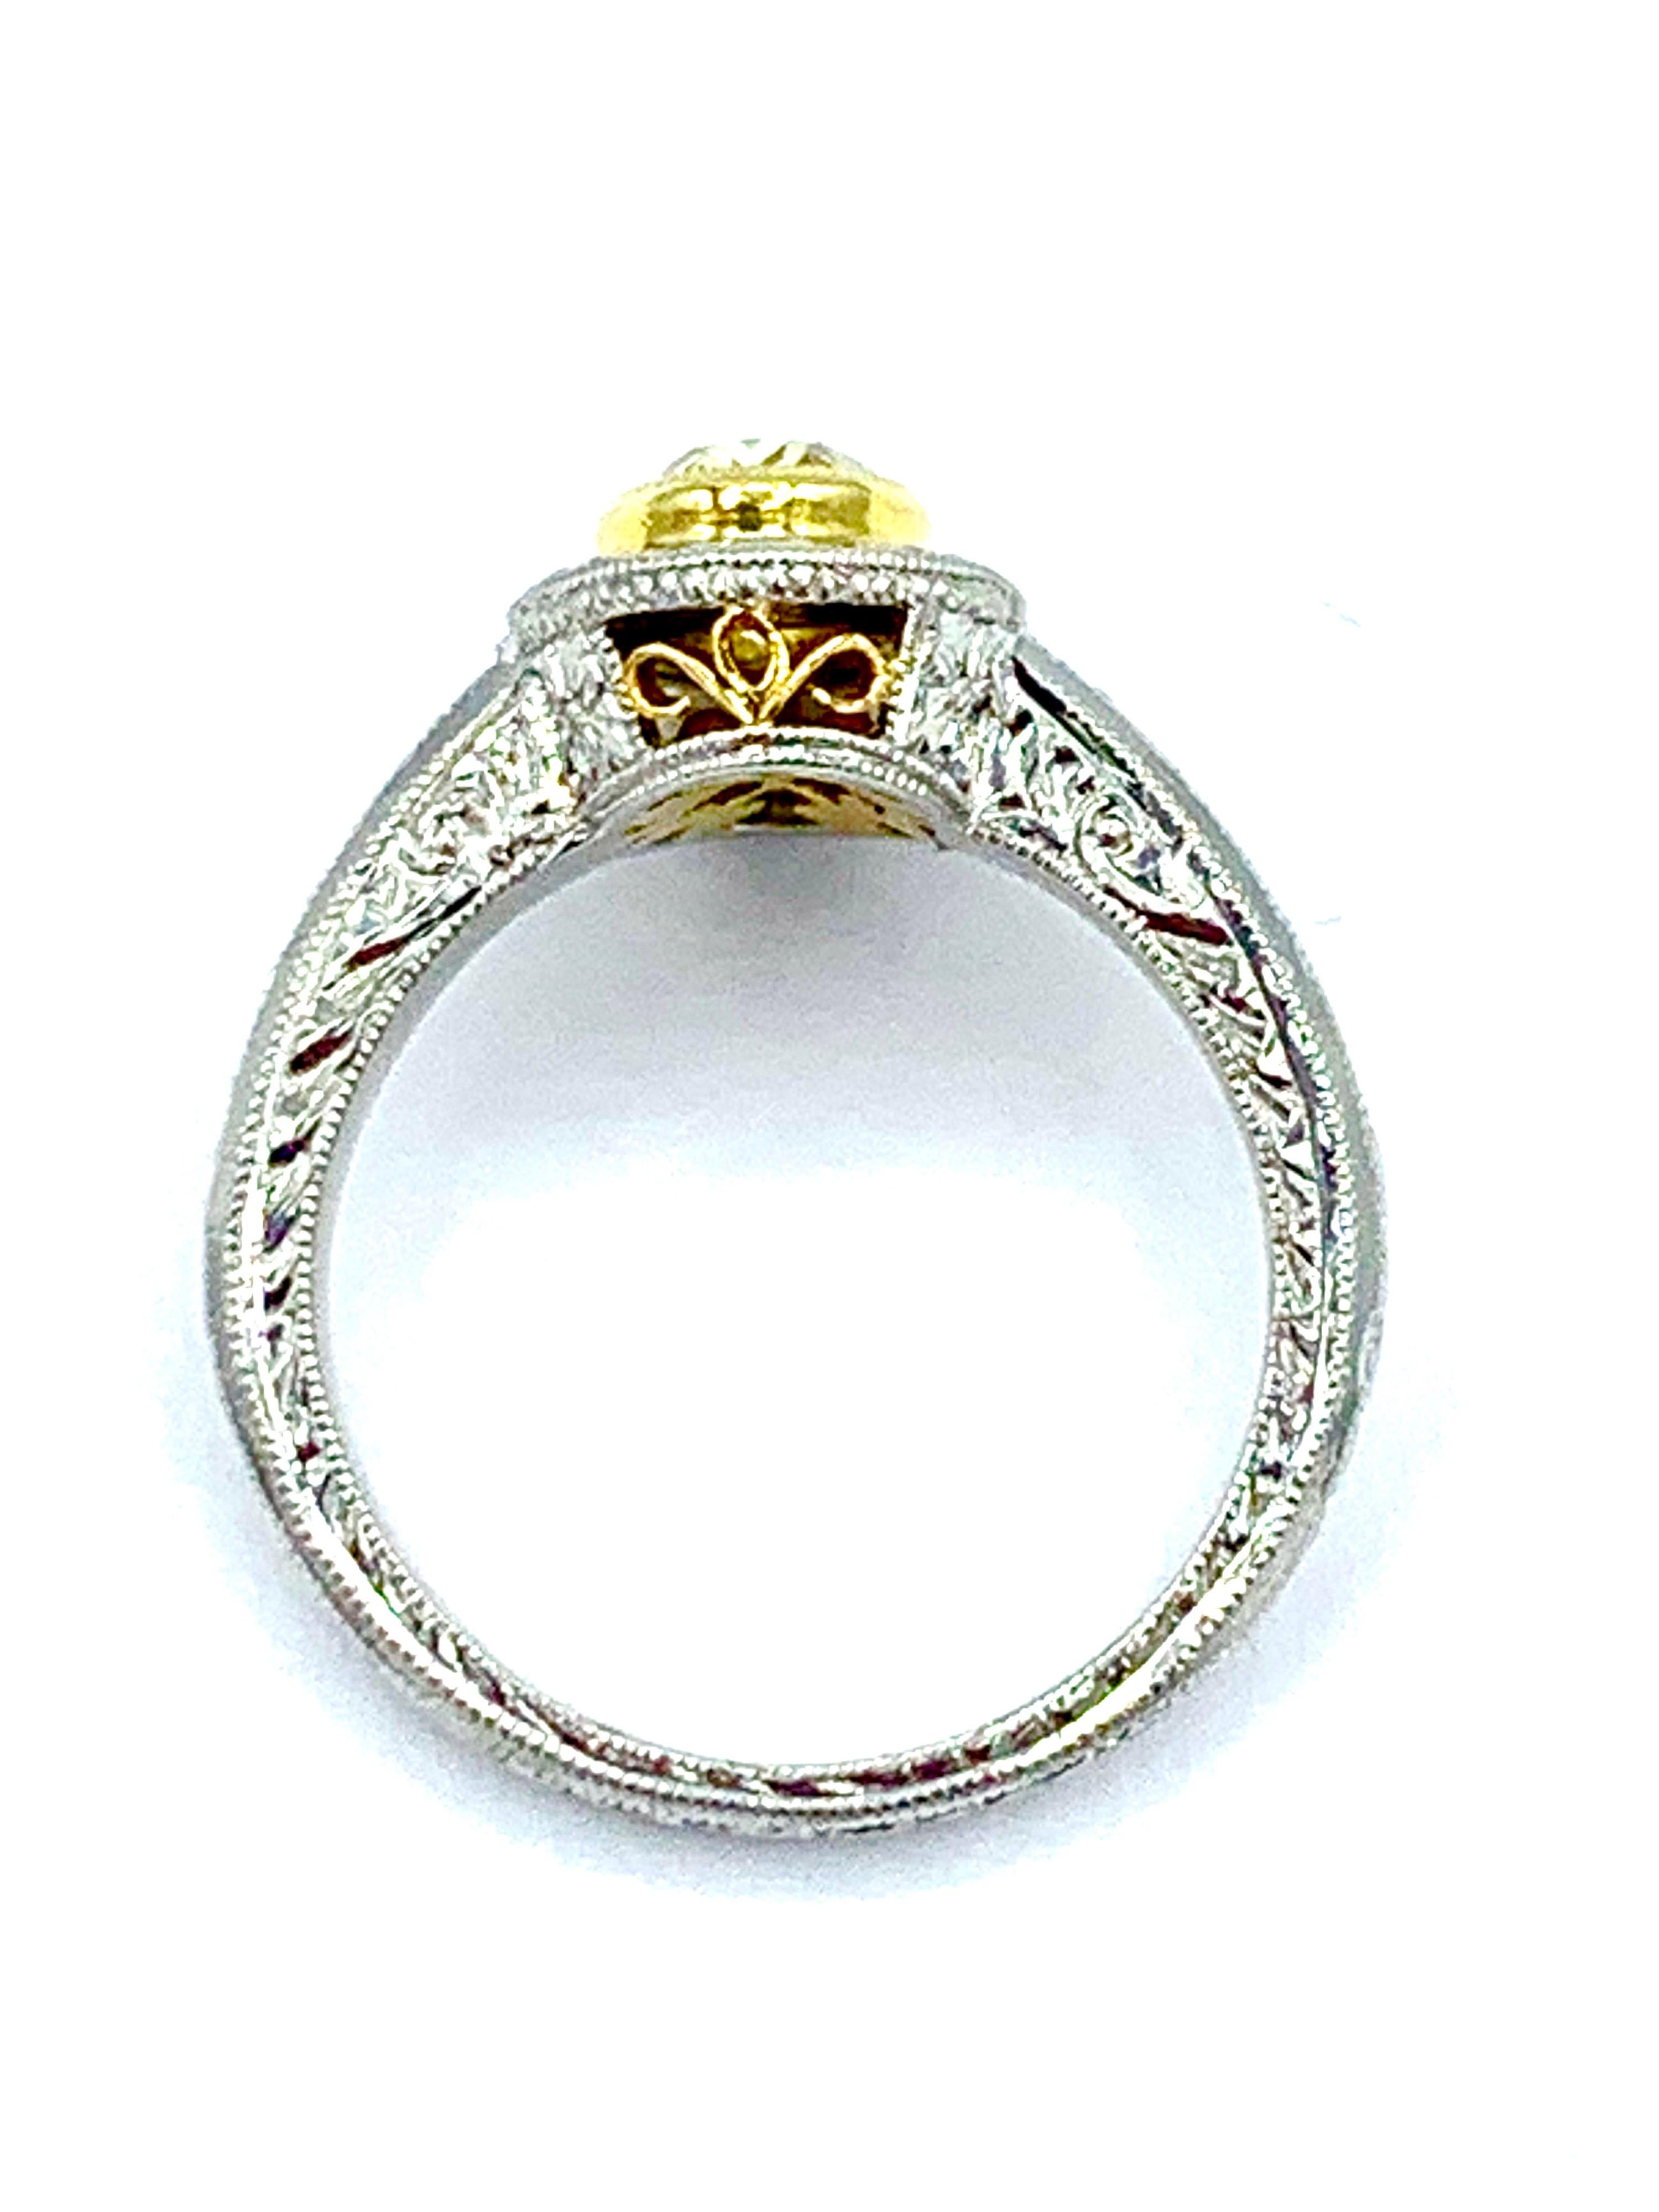 1.00 Carat Fancy Yellow Oval Diamond Platinum and Yellow Gold Engagement Ring 2